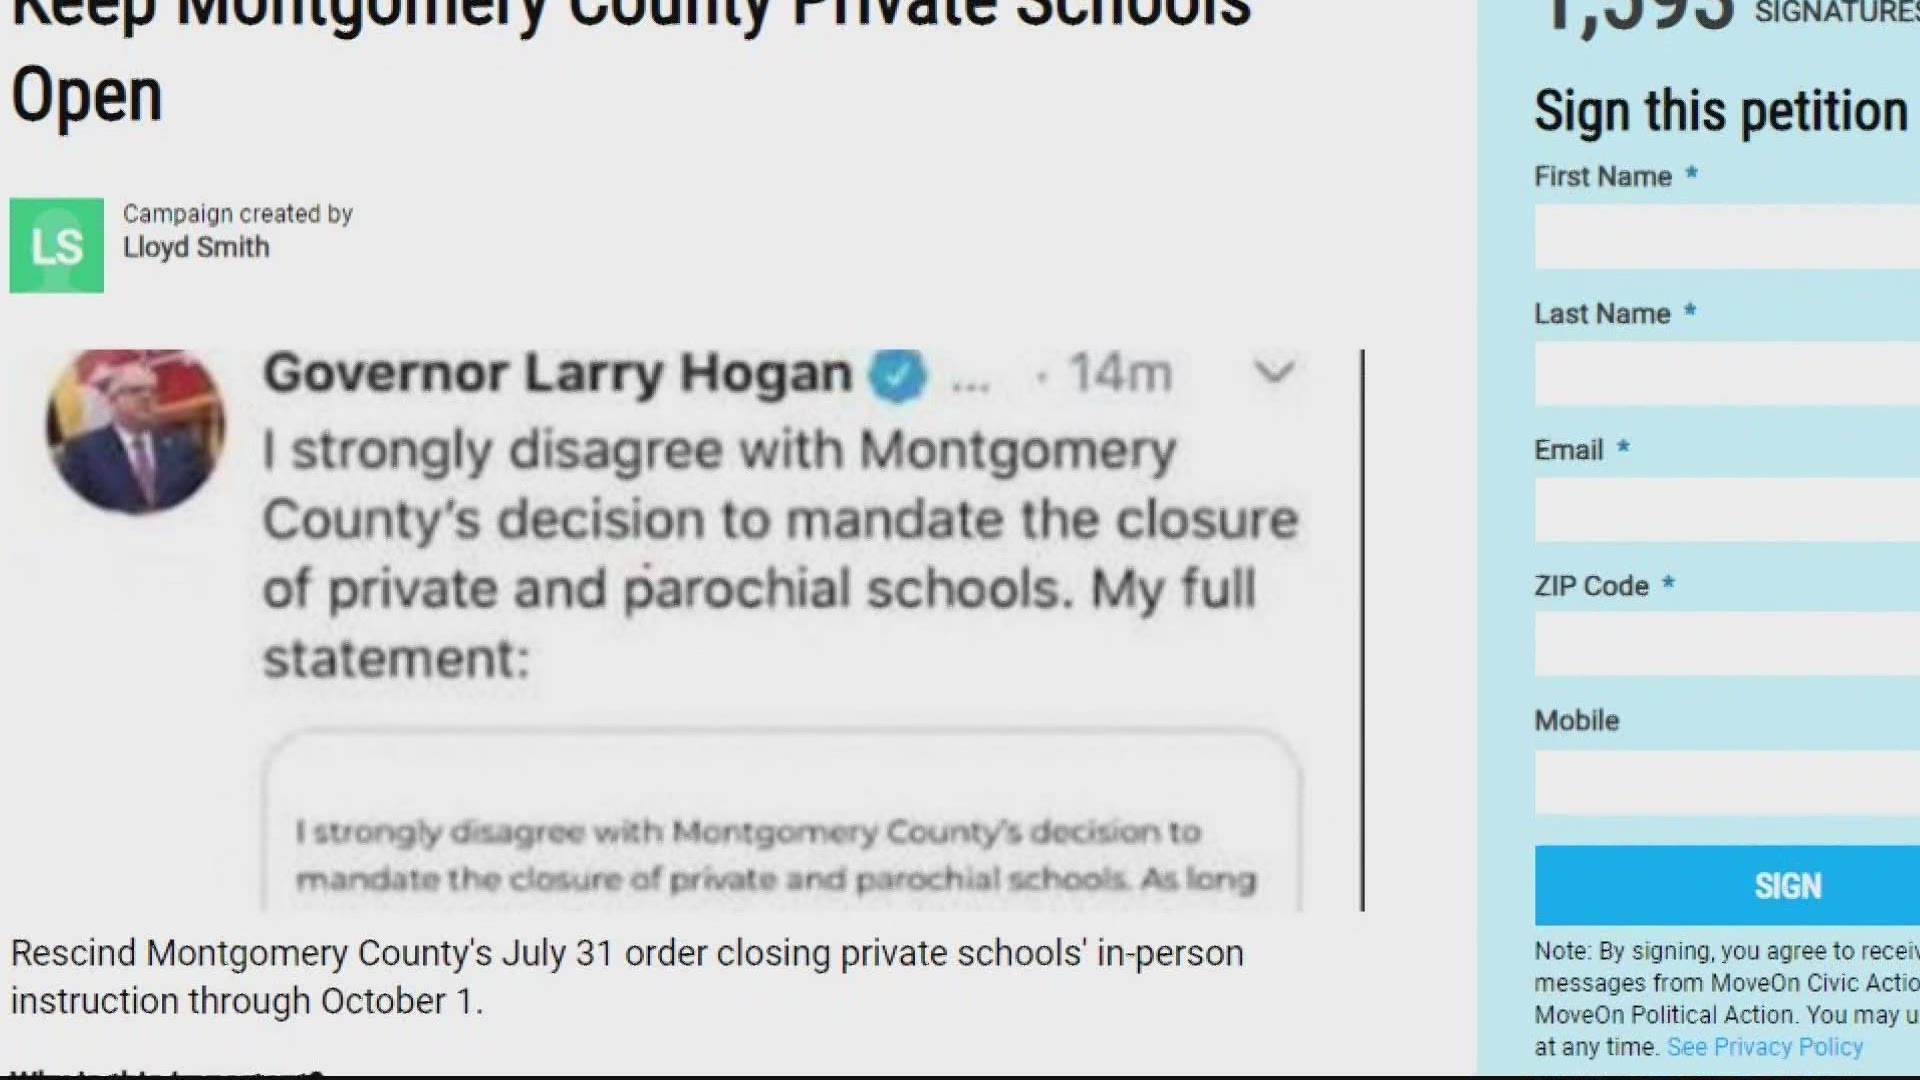 The governor said this is to ensure schools and school systems will have the primary authority to determine when to safely reopen schools for in-person instruction.